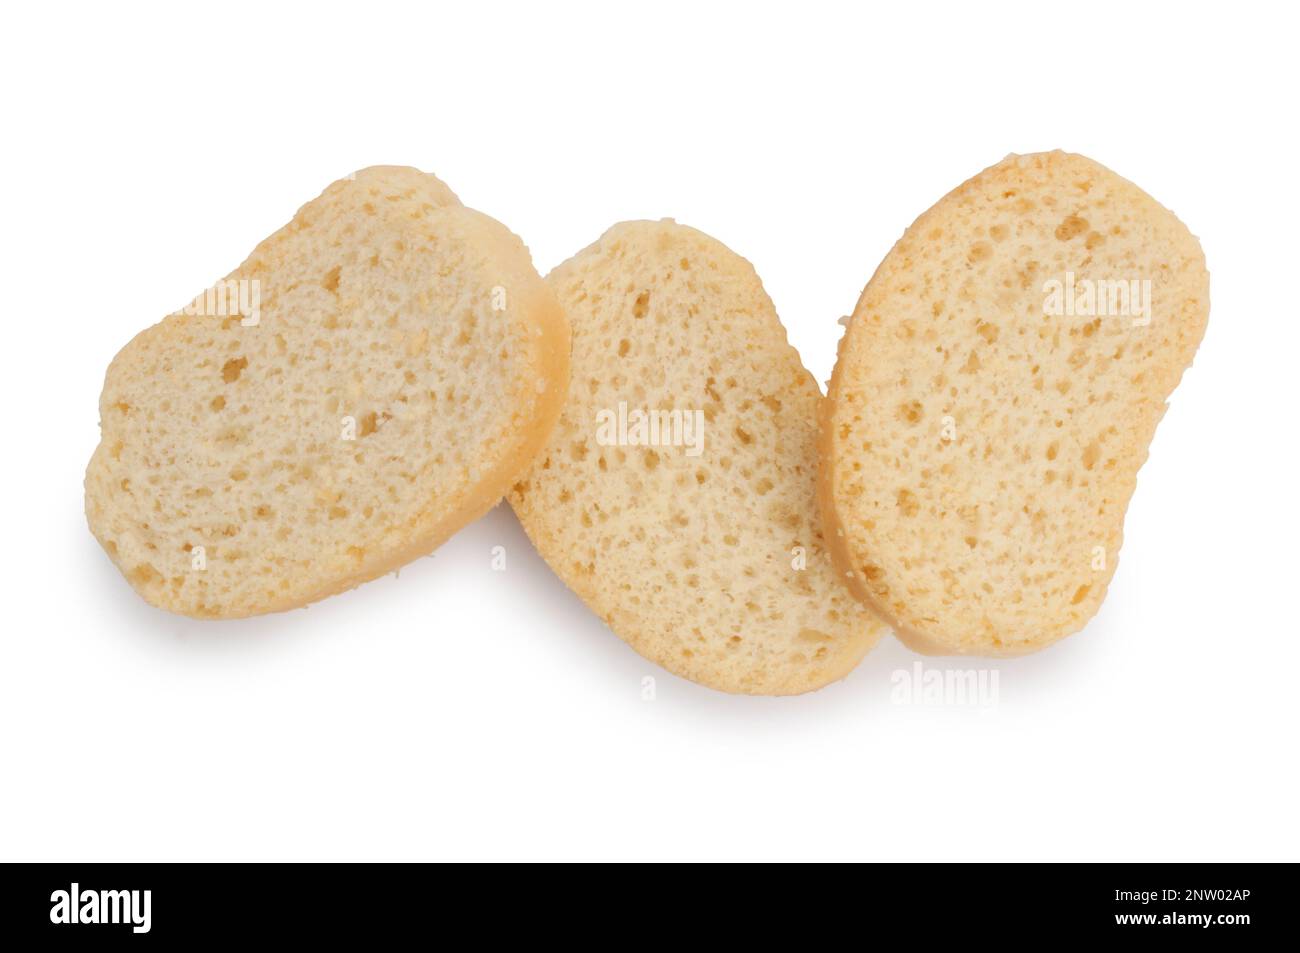 Studio shot of slices of bruschetta cut out against a white background - John Gollop Stock Photo